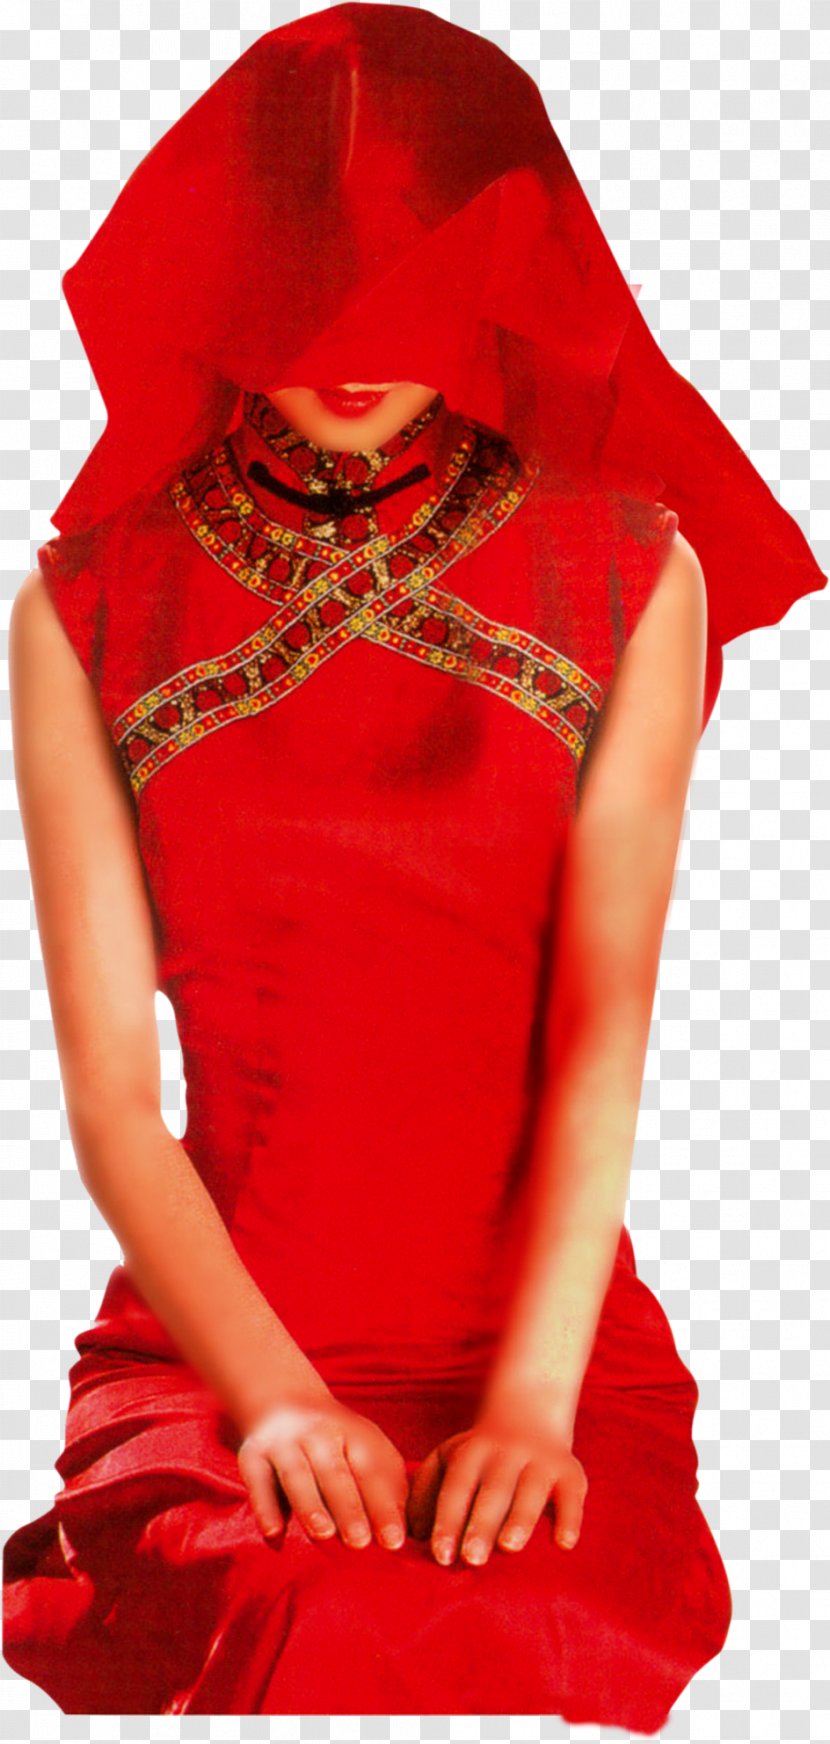 U76d6u5934 Bride Wedding Chinese Marriage - Outerwear - New Model Of Background Transparent PNG